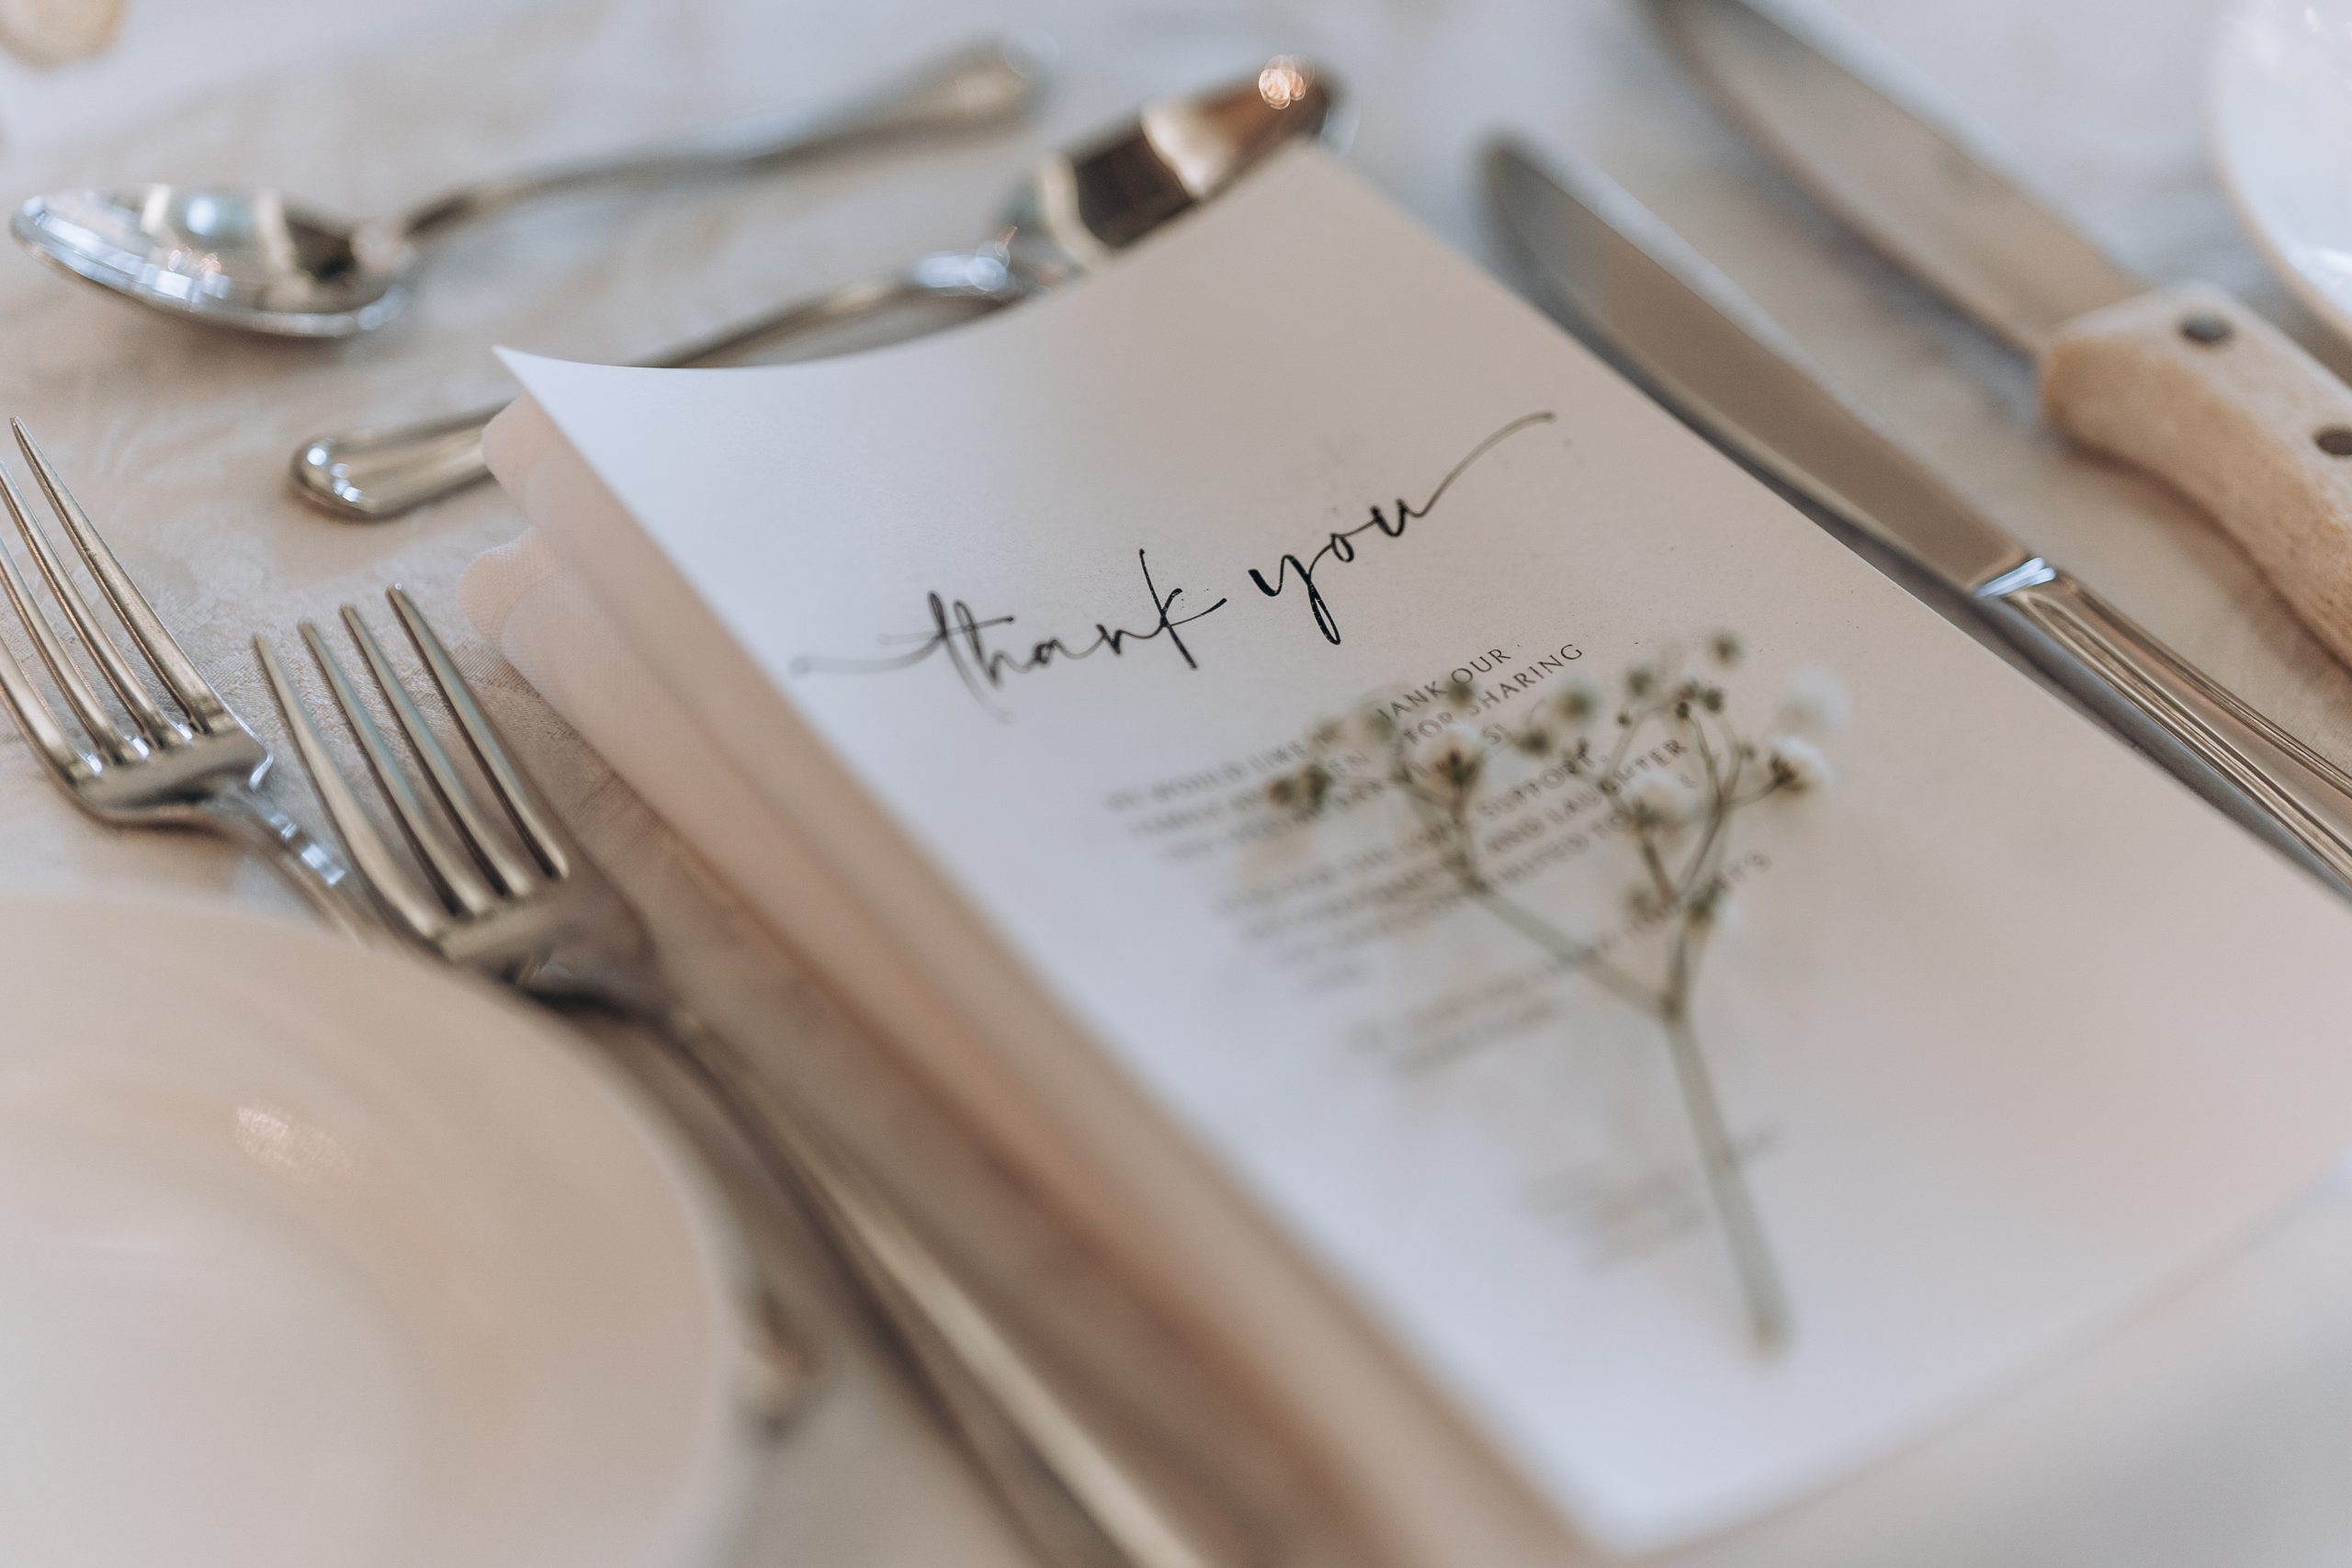 detail image of the menu at a wedding reception dinner